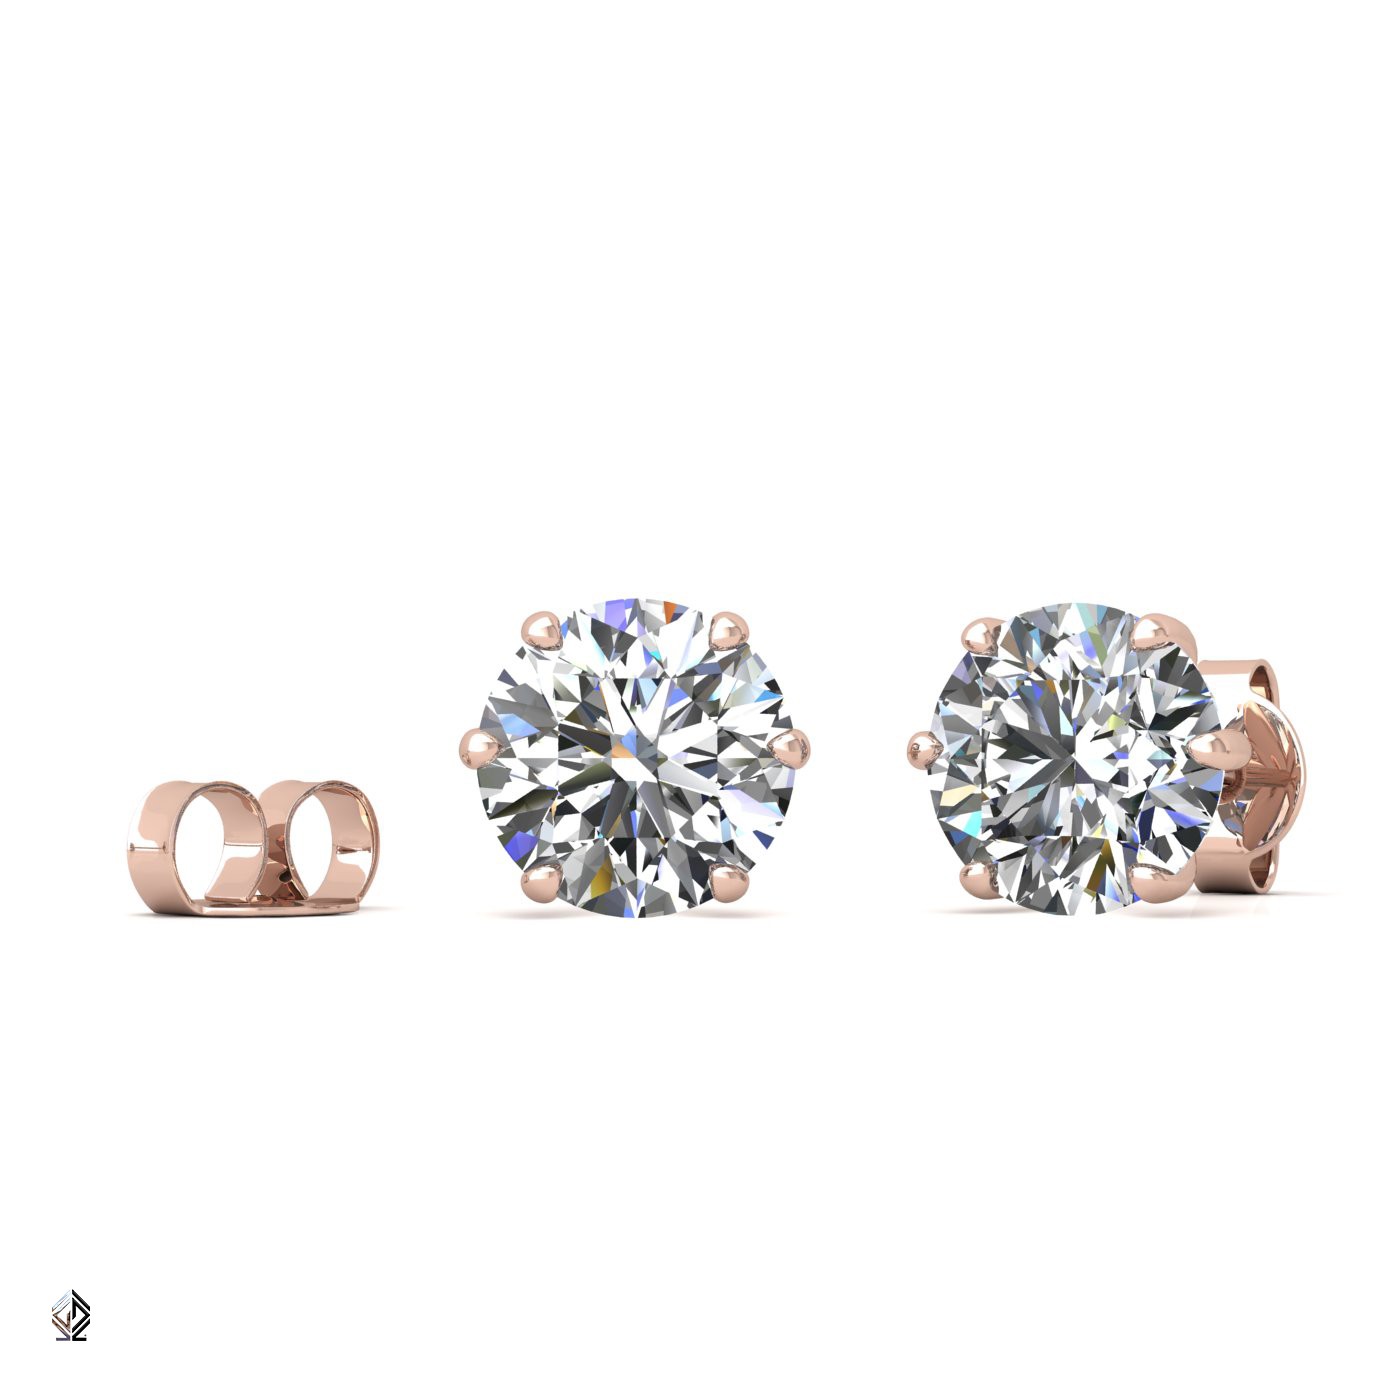 18k rose gold 2.0 ct each (4,0 tcw) 6 prongs round shape diamond earrings Photos & images